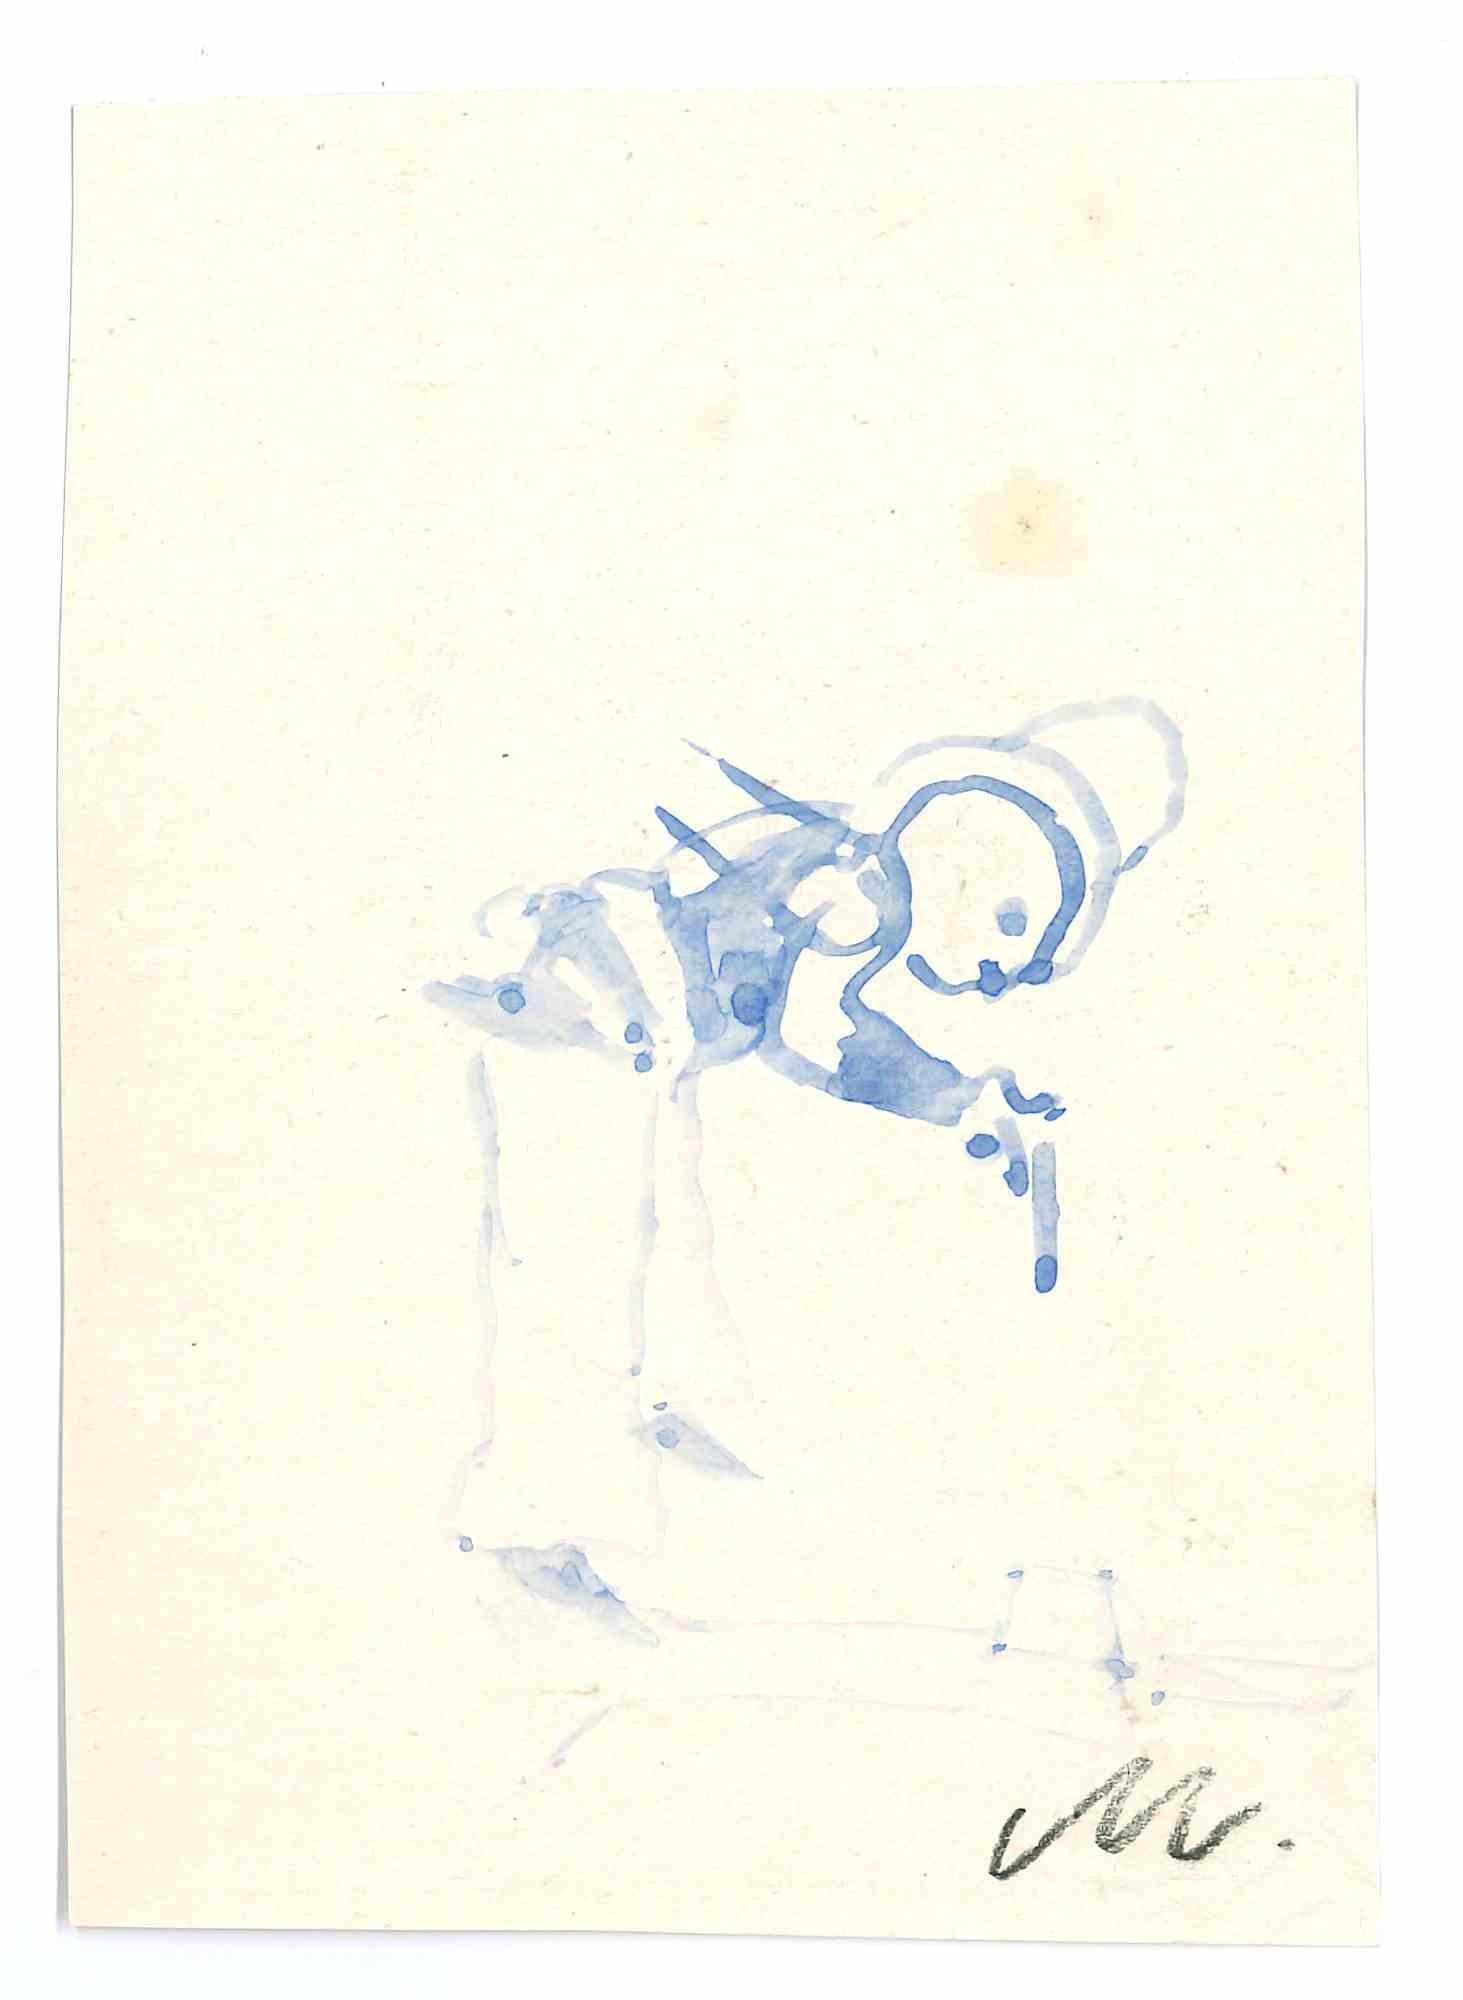 The Shoot is a watercolor Drawing realized by Mino Maccari  (1924-1989) in the 1960s.

Monogrammed on the lower margin.

Good conditions.

Mino Maccari (Siena, 1924-Rome, June 16, 1989) was an Italian writer, painter, engraver and journalist, winner